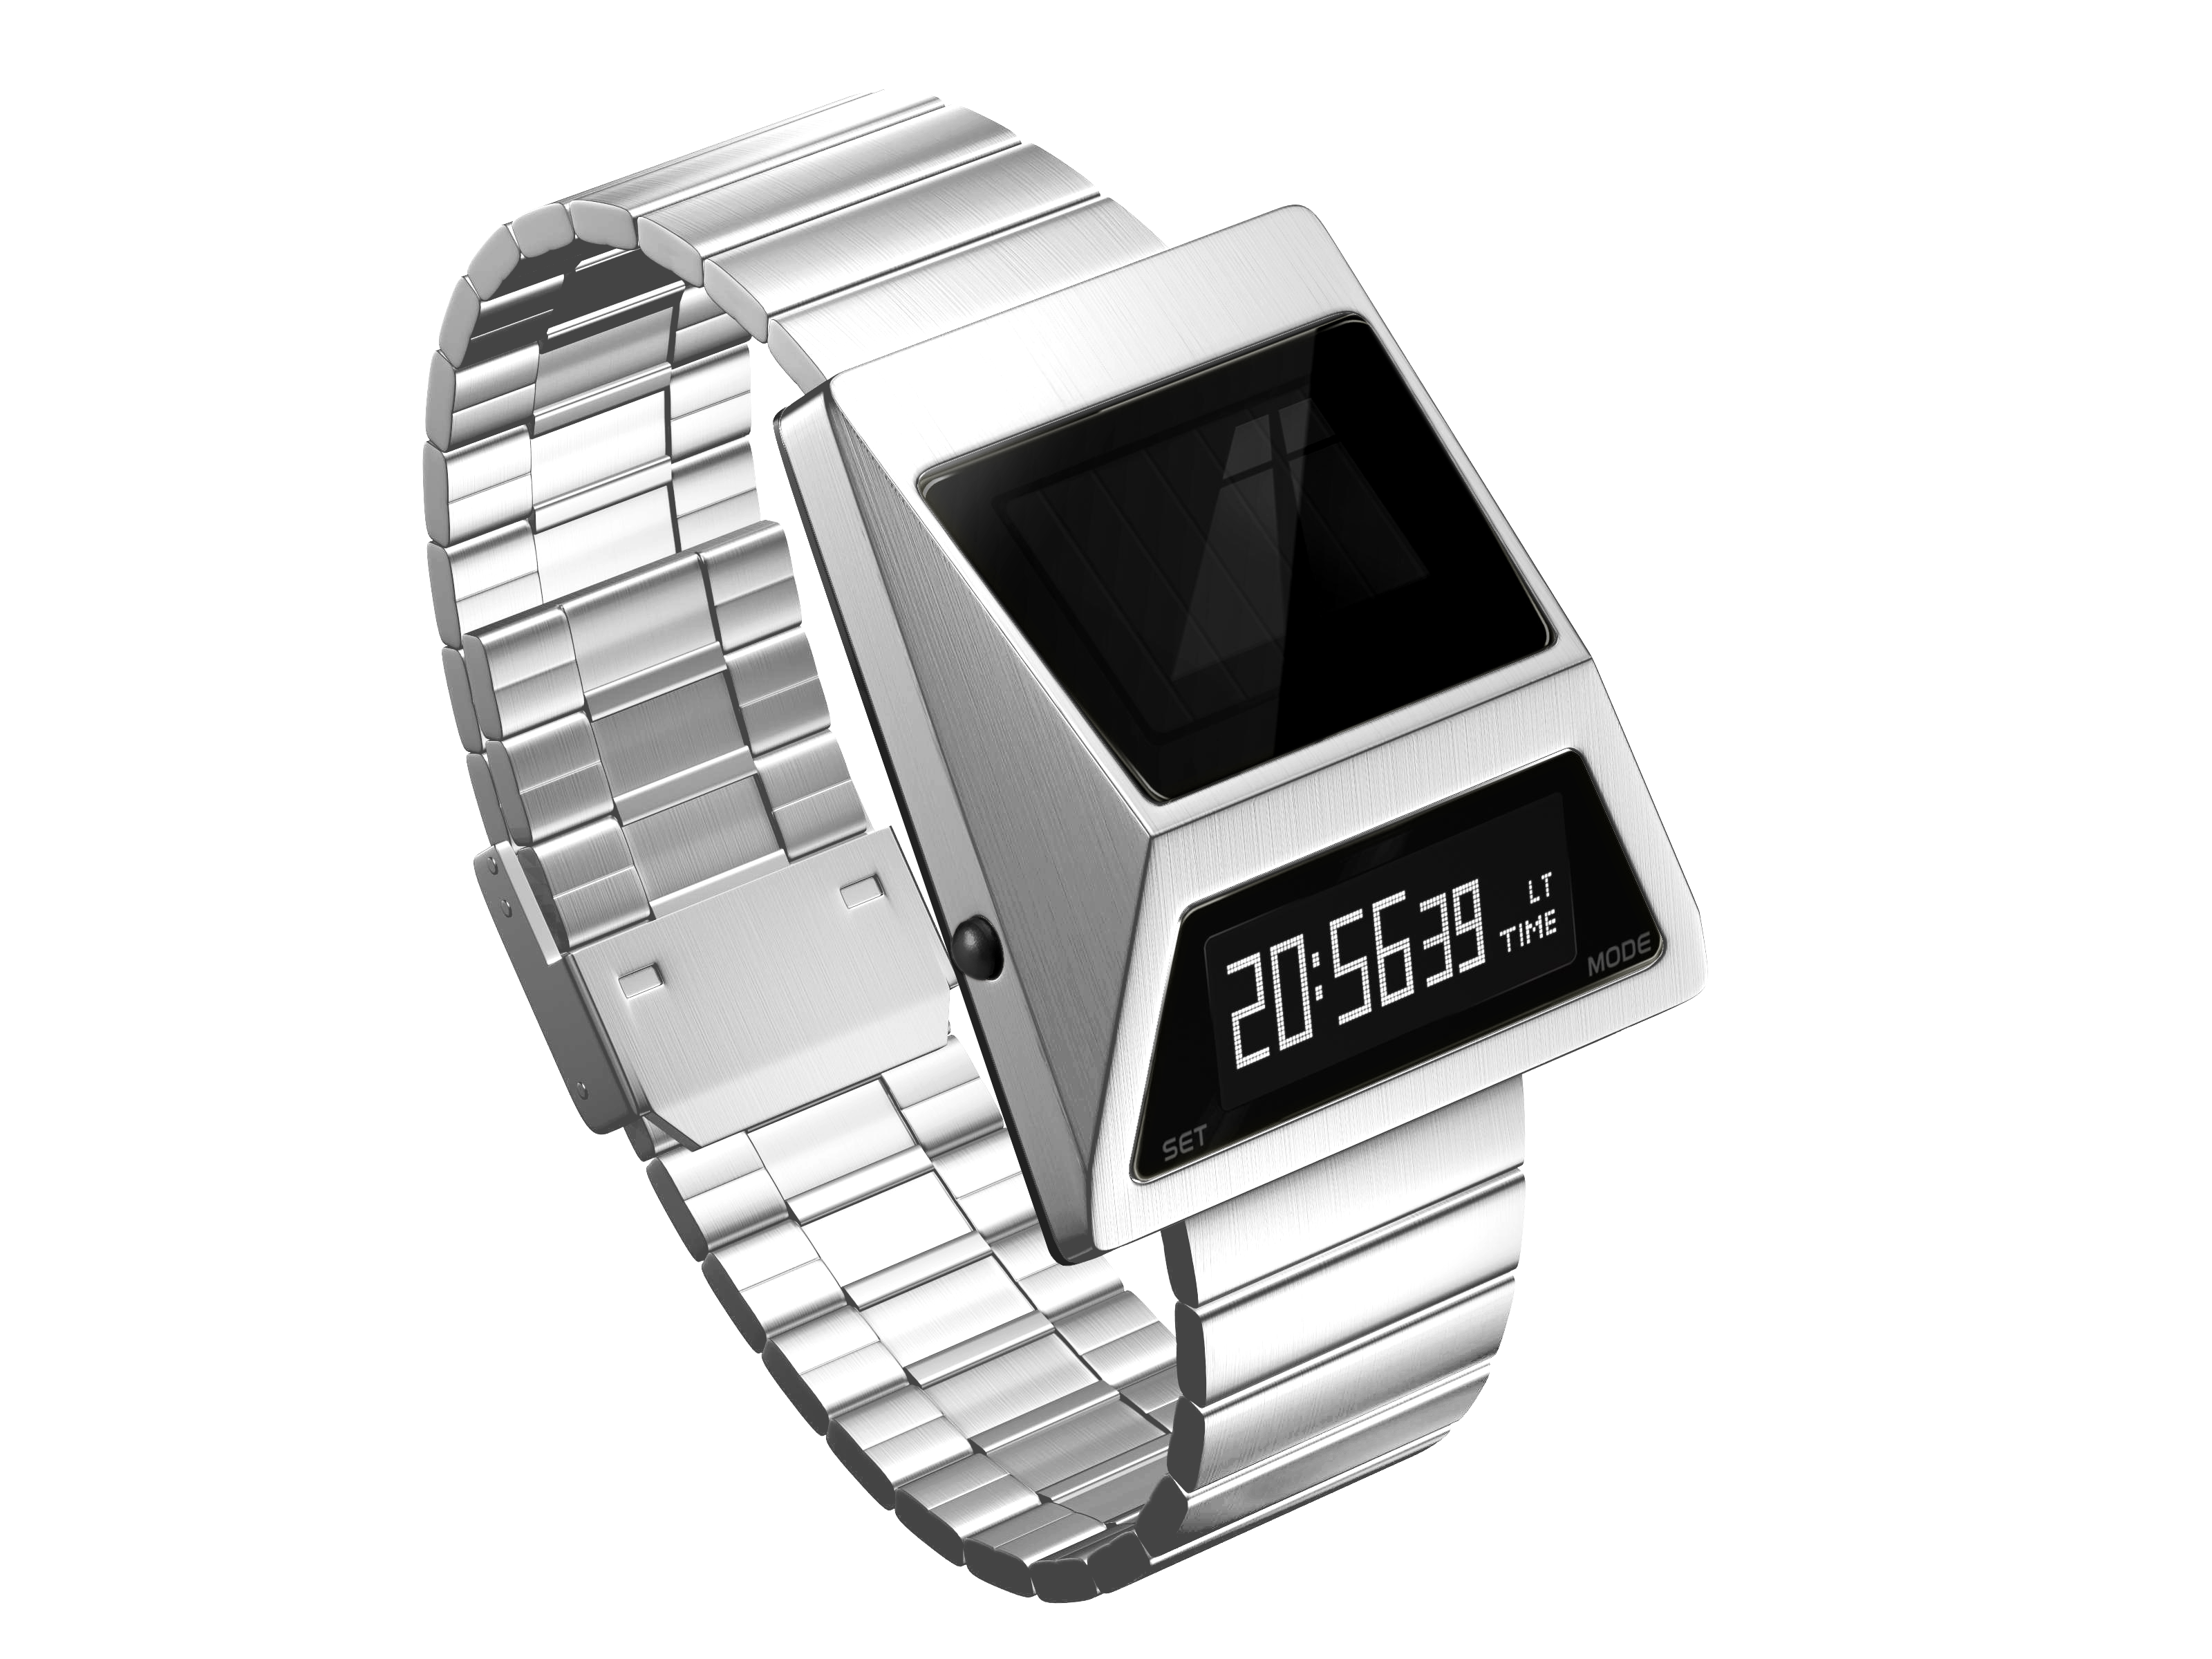 solar-powered-cyber-watches-s3000S-W-side view